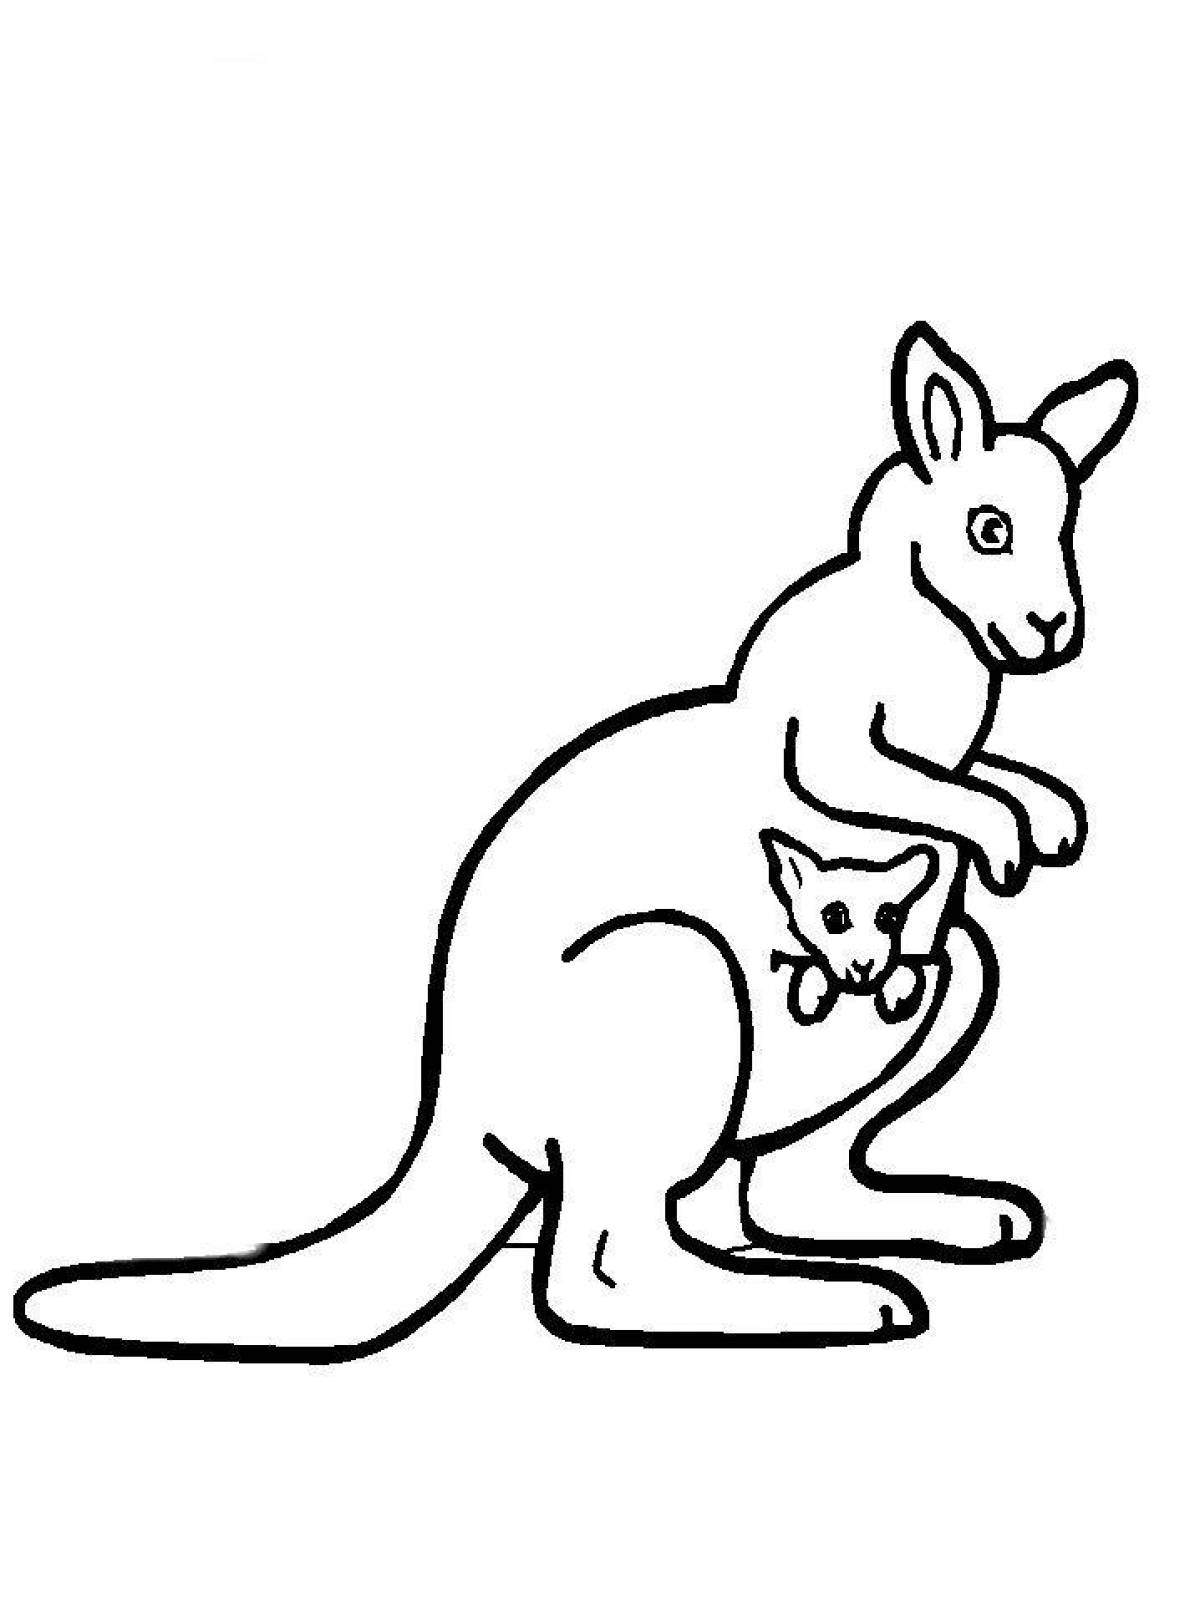 Amazing kangaroo coloring pages for kids